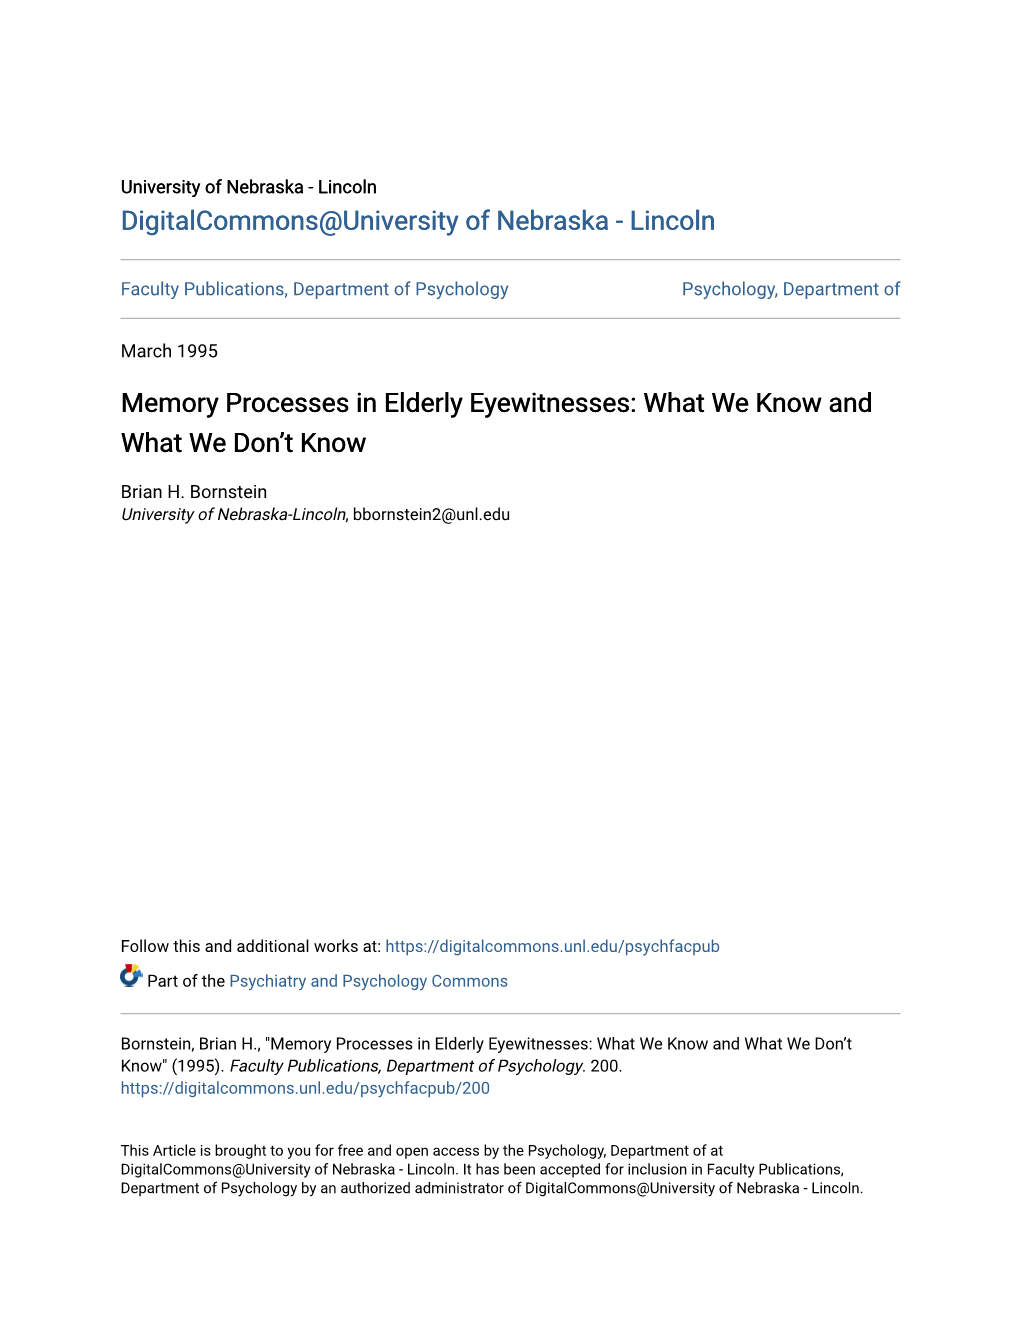 Memory Processes in Elderly Eyewitnesses: What We Know and What We Don’T Know